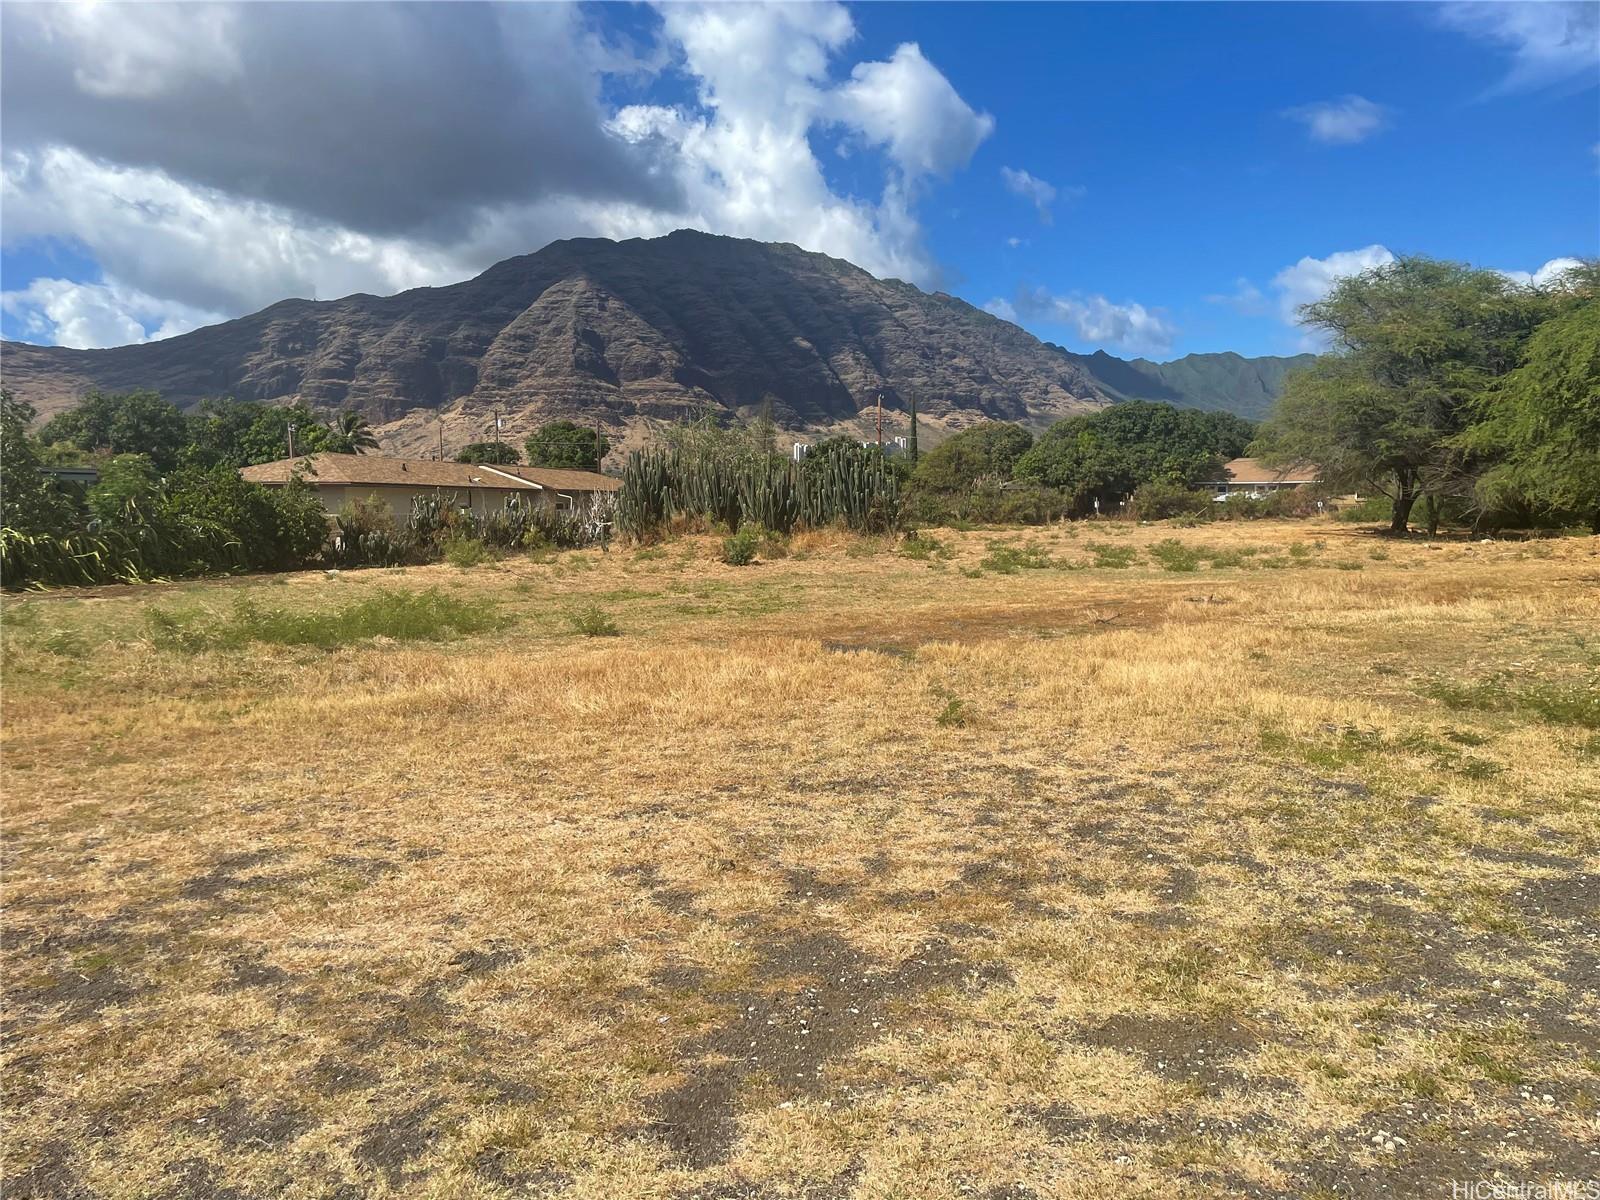 84-1114 Farrington Hwy  Waianae, Hi vacant land for sale - photo 2 of 8